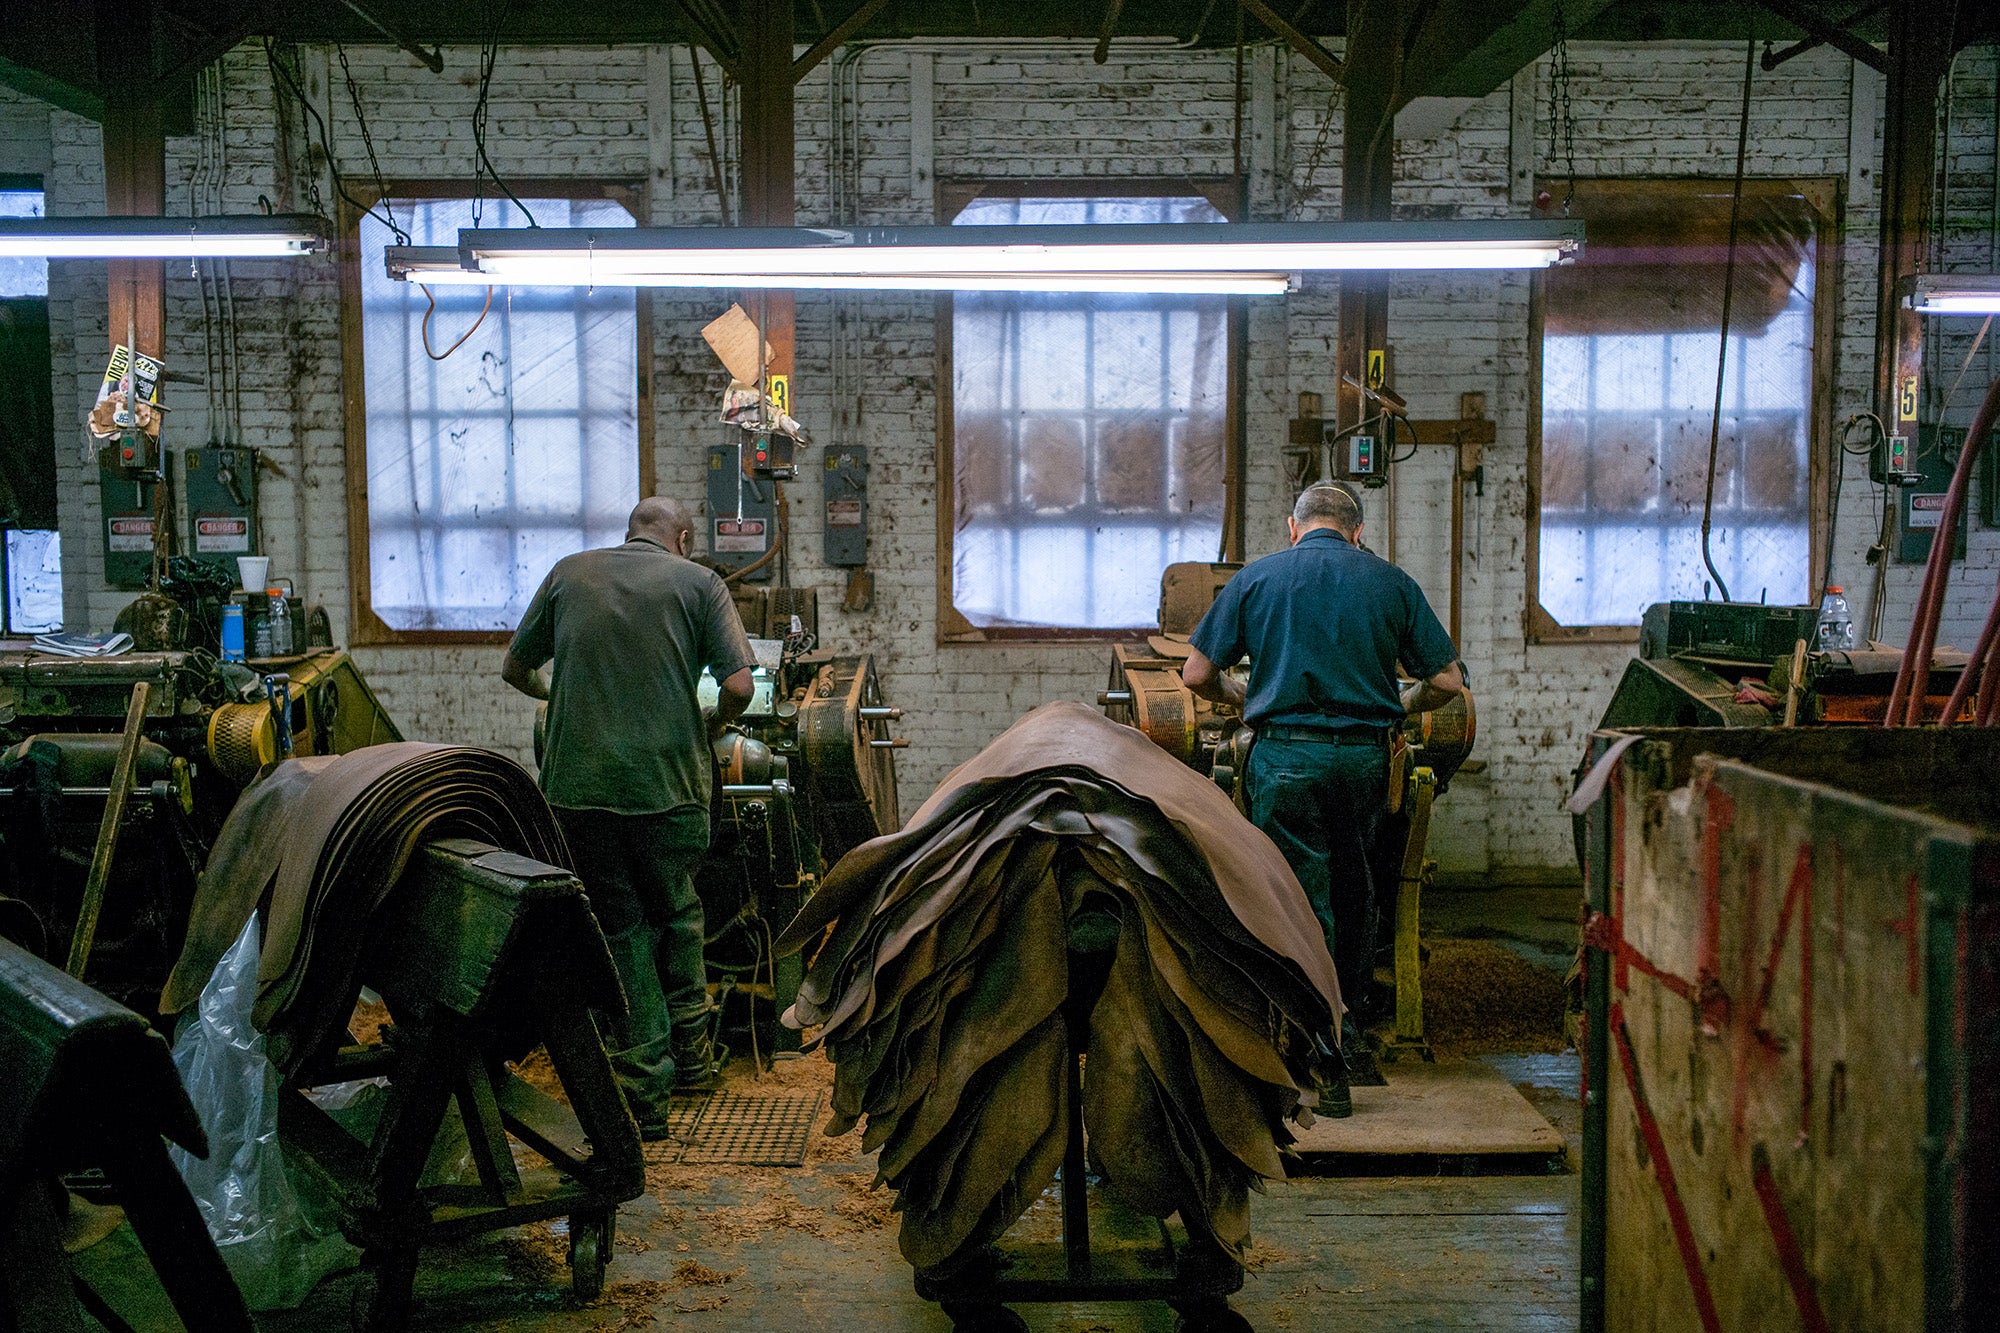 Two men at a tannery process leather hides.